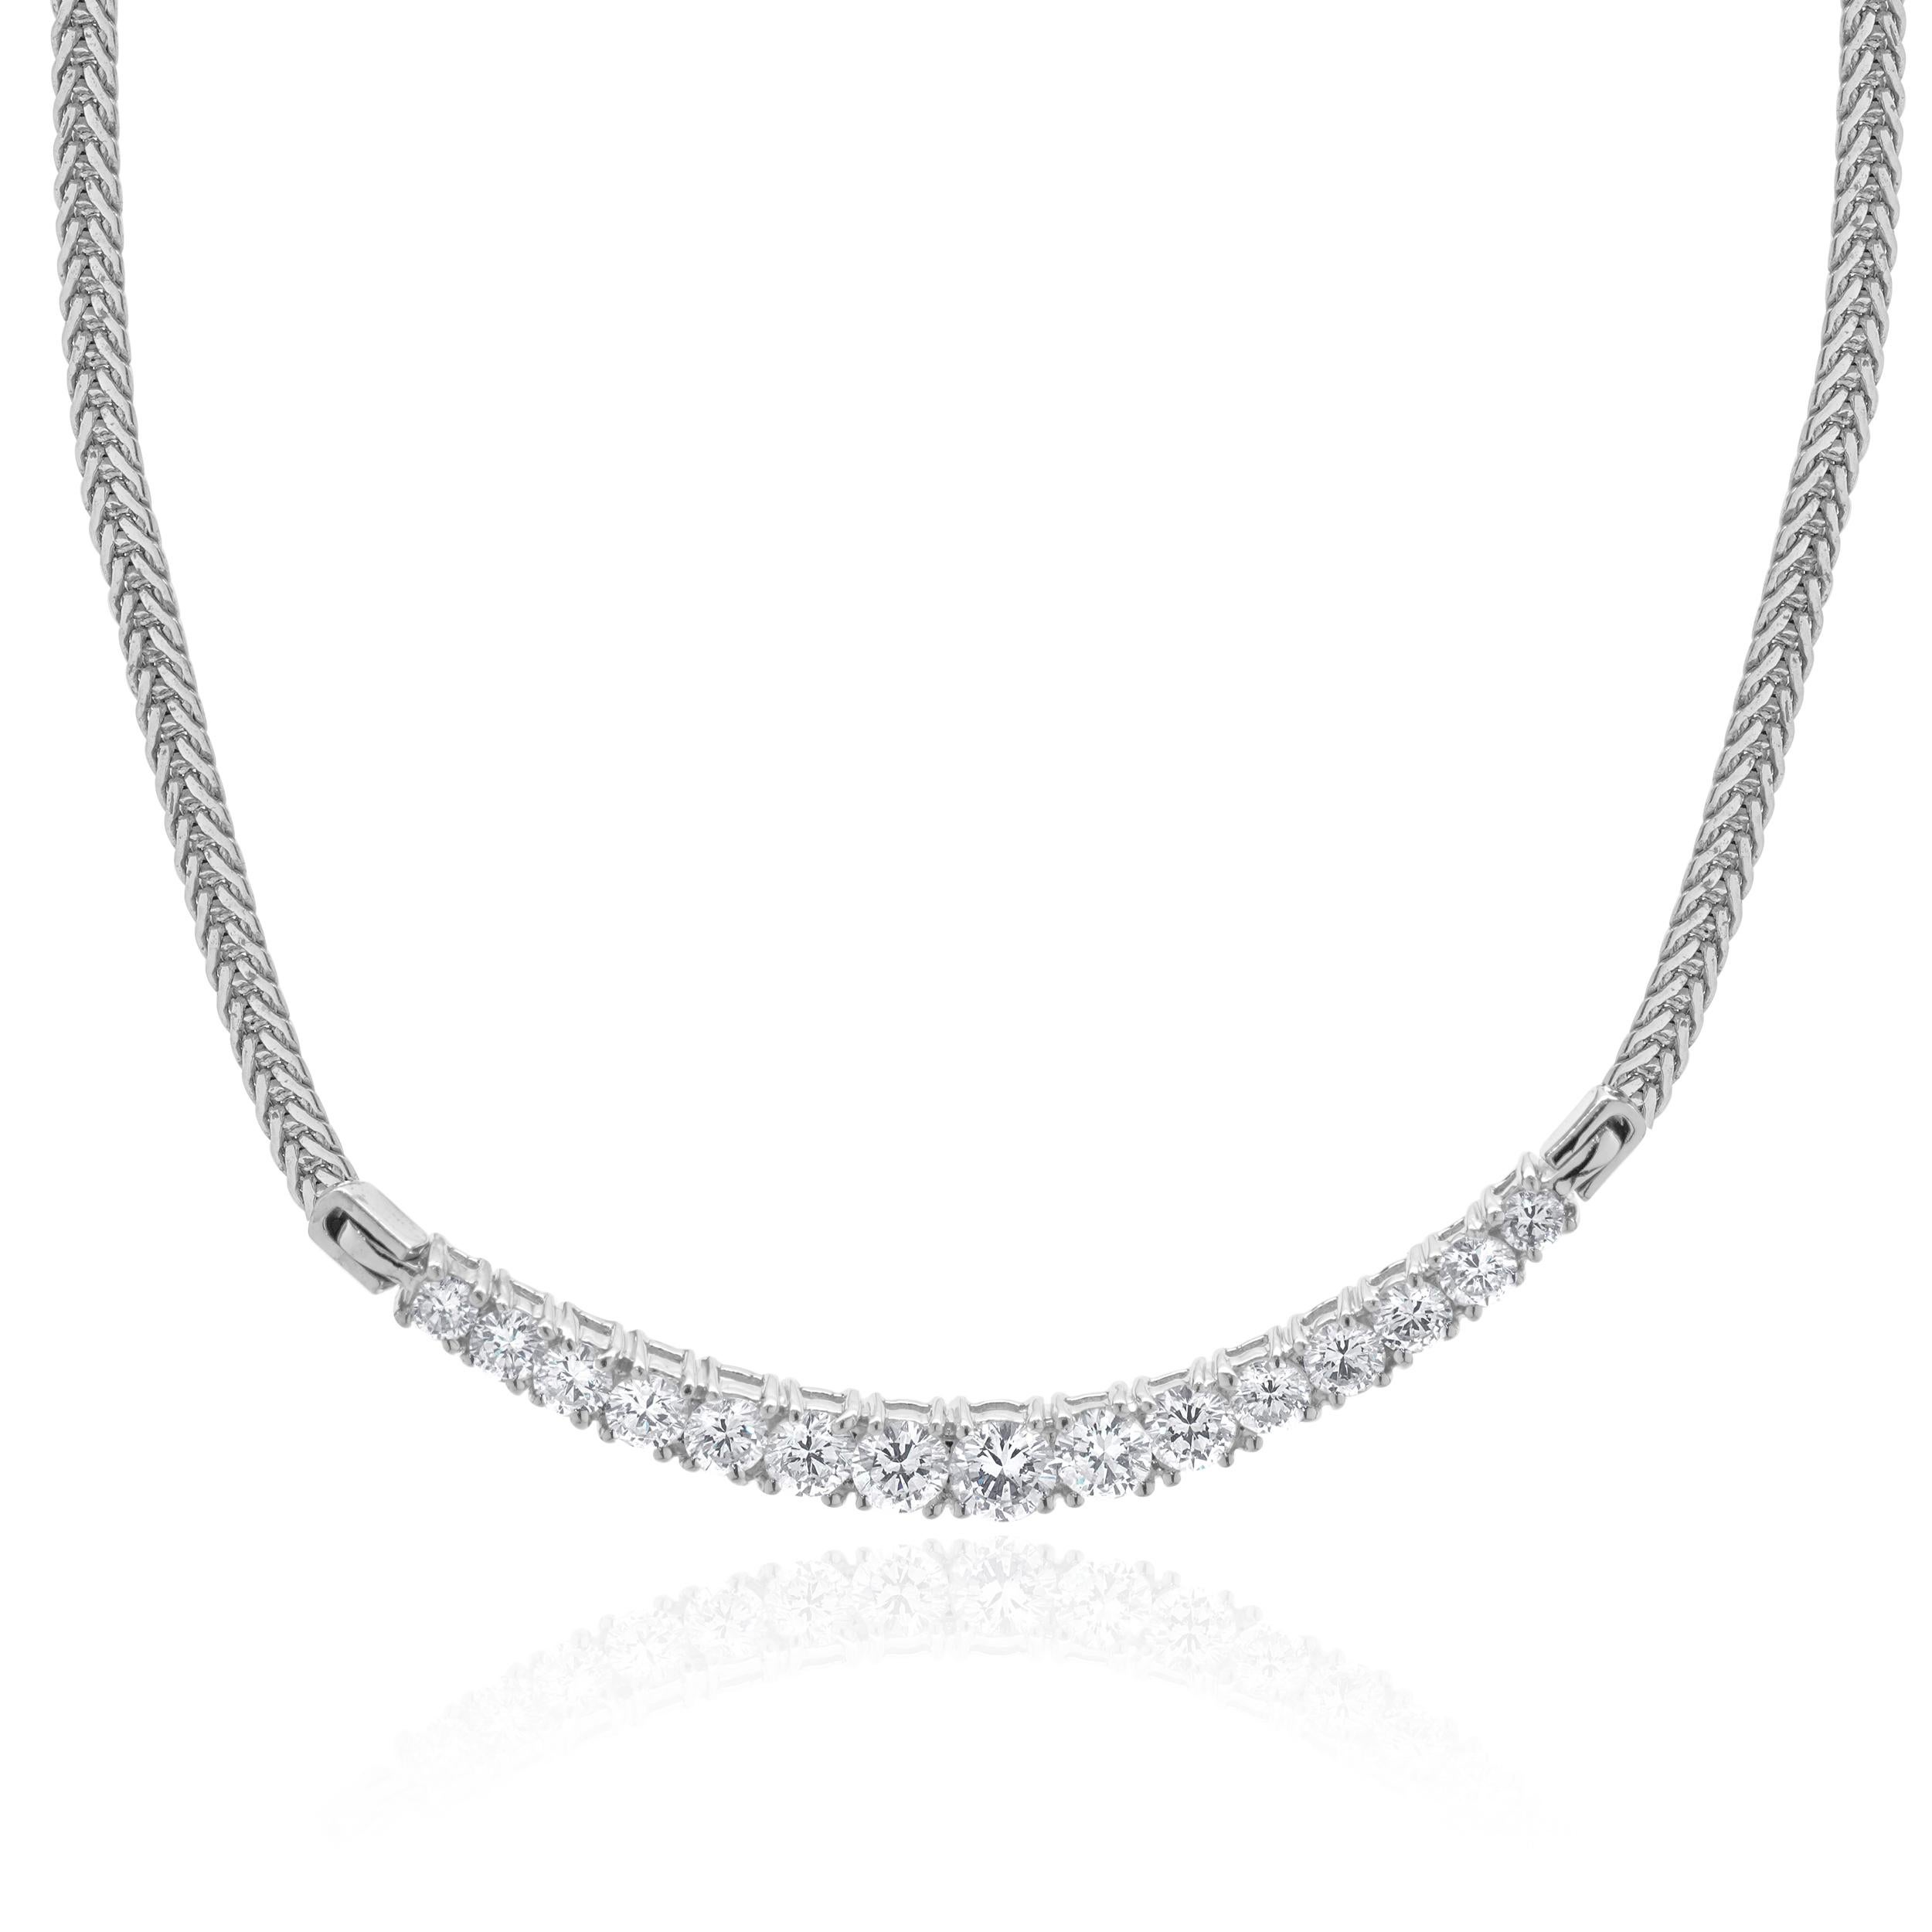 Designer: custom
Material: 14K white gold
Diamonds: 13 round brilliant cut = 1.33cttw
Color: H
Clarity: SI2
Dimensions: necklace measures 14-inches in length
Weight: 11.98 grams
